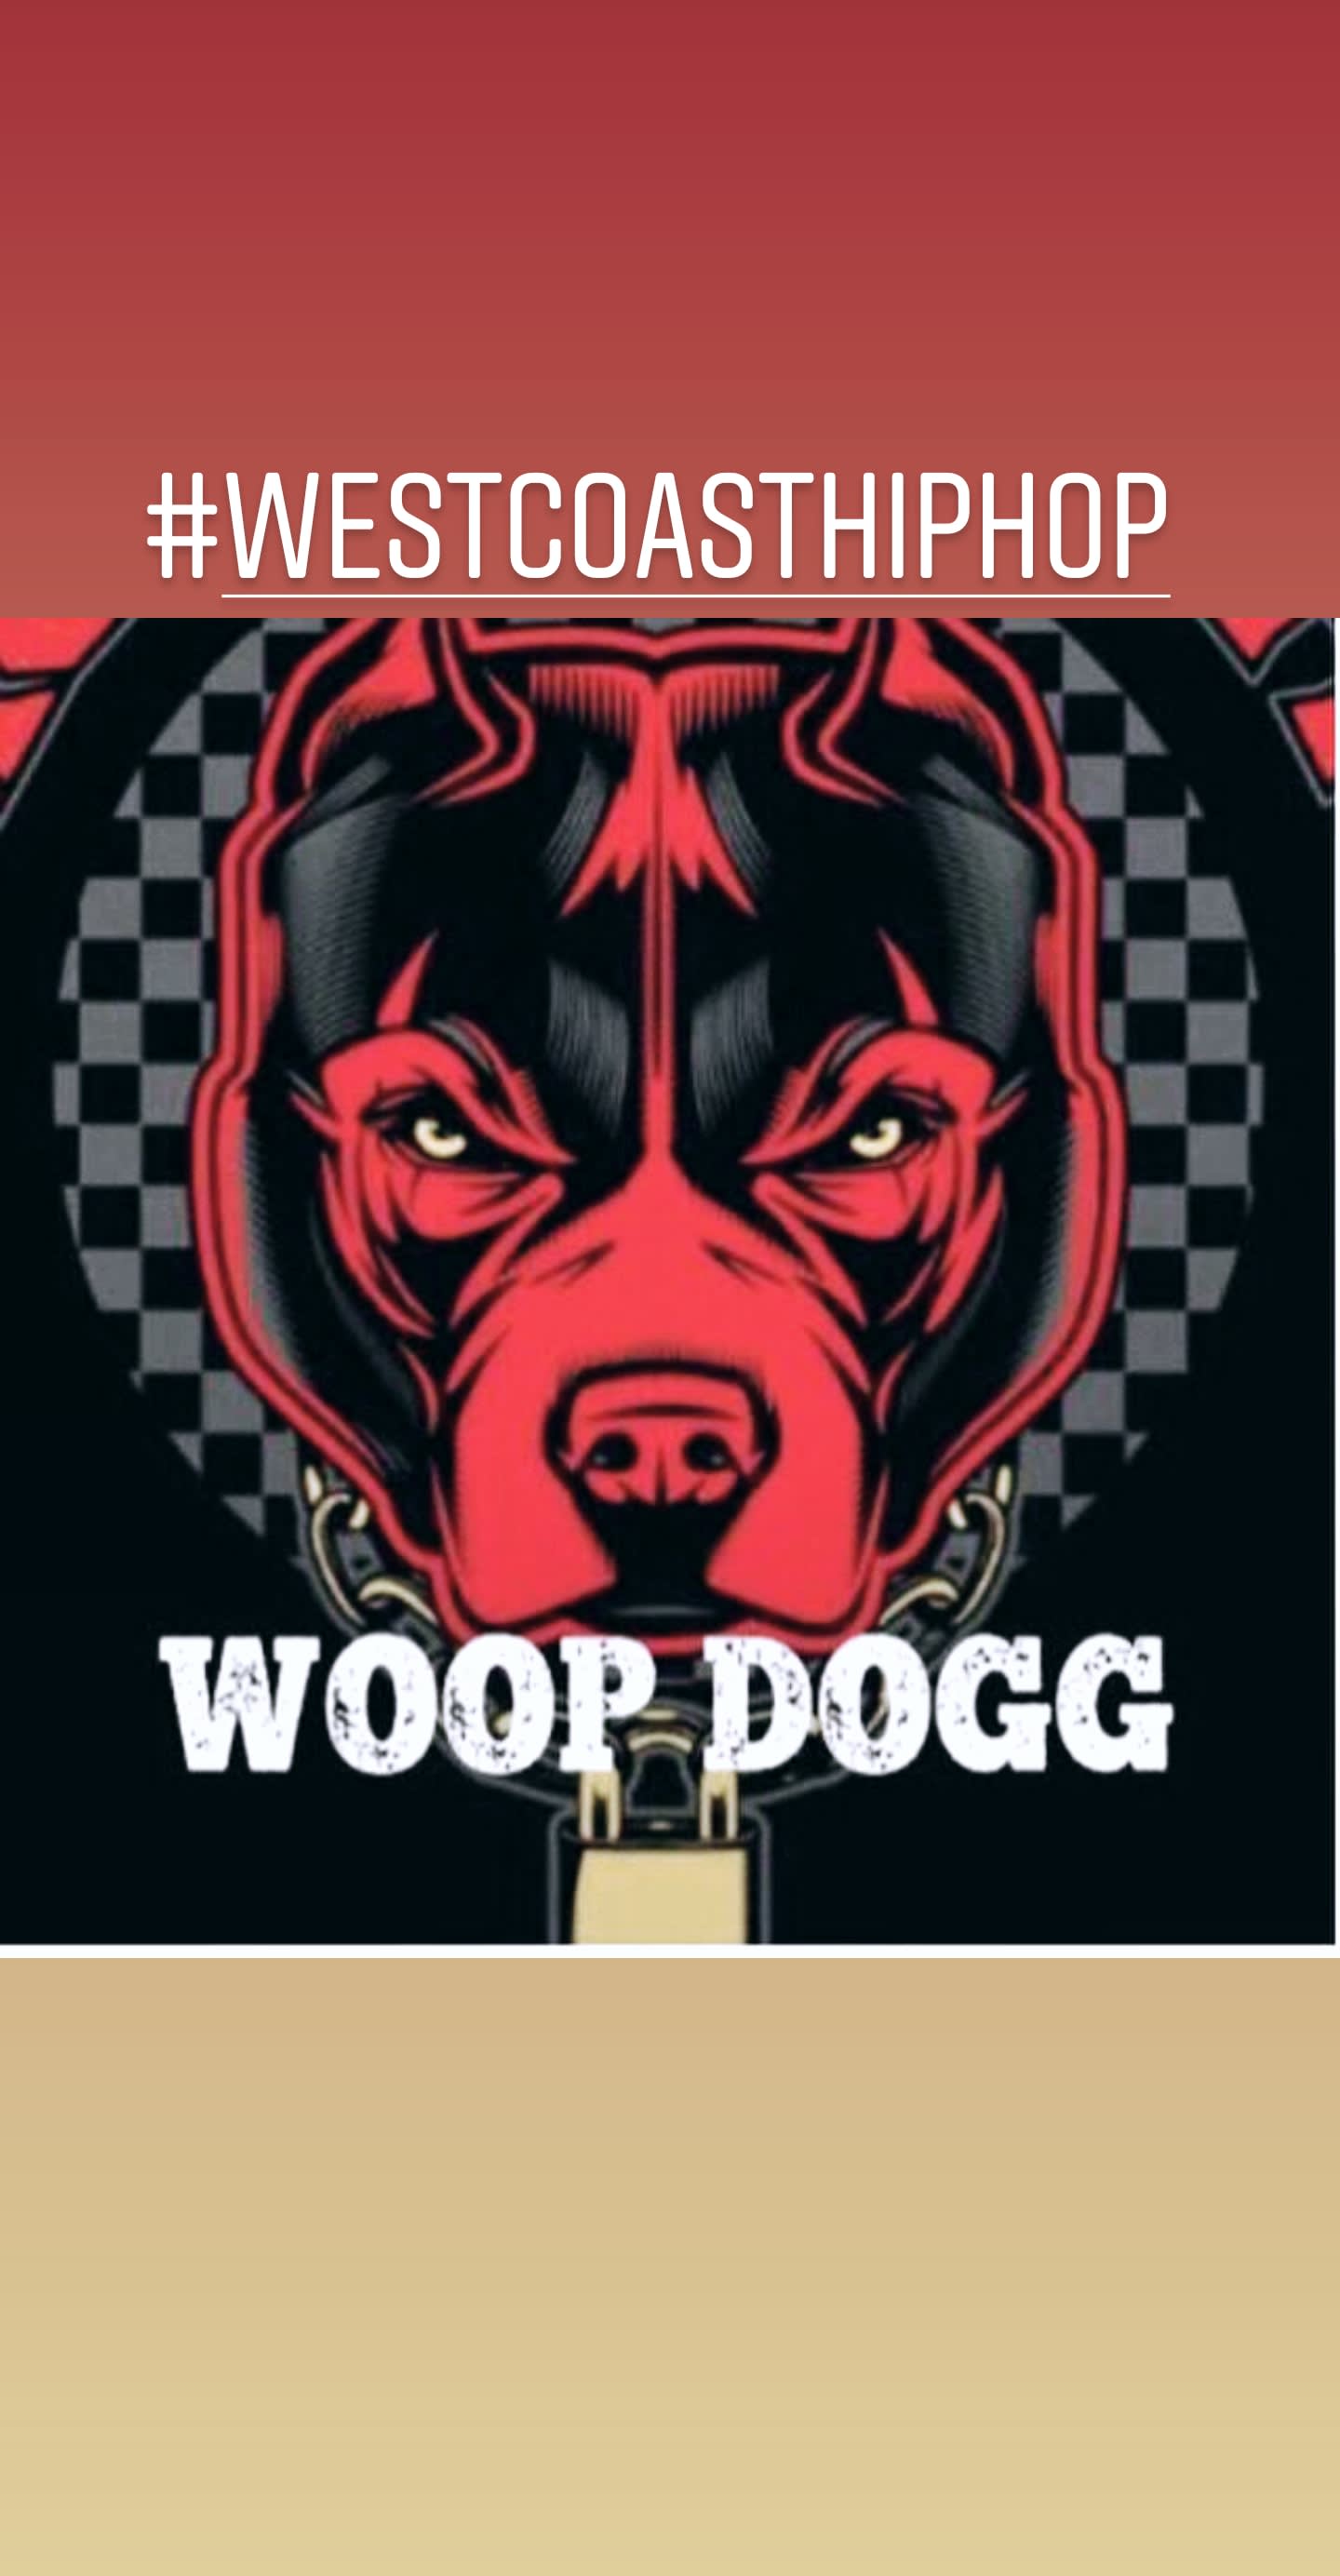 WOOPDOGG